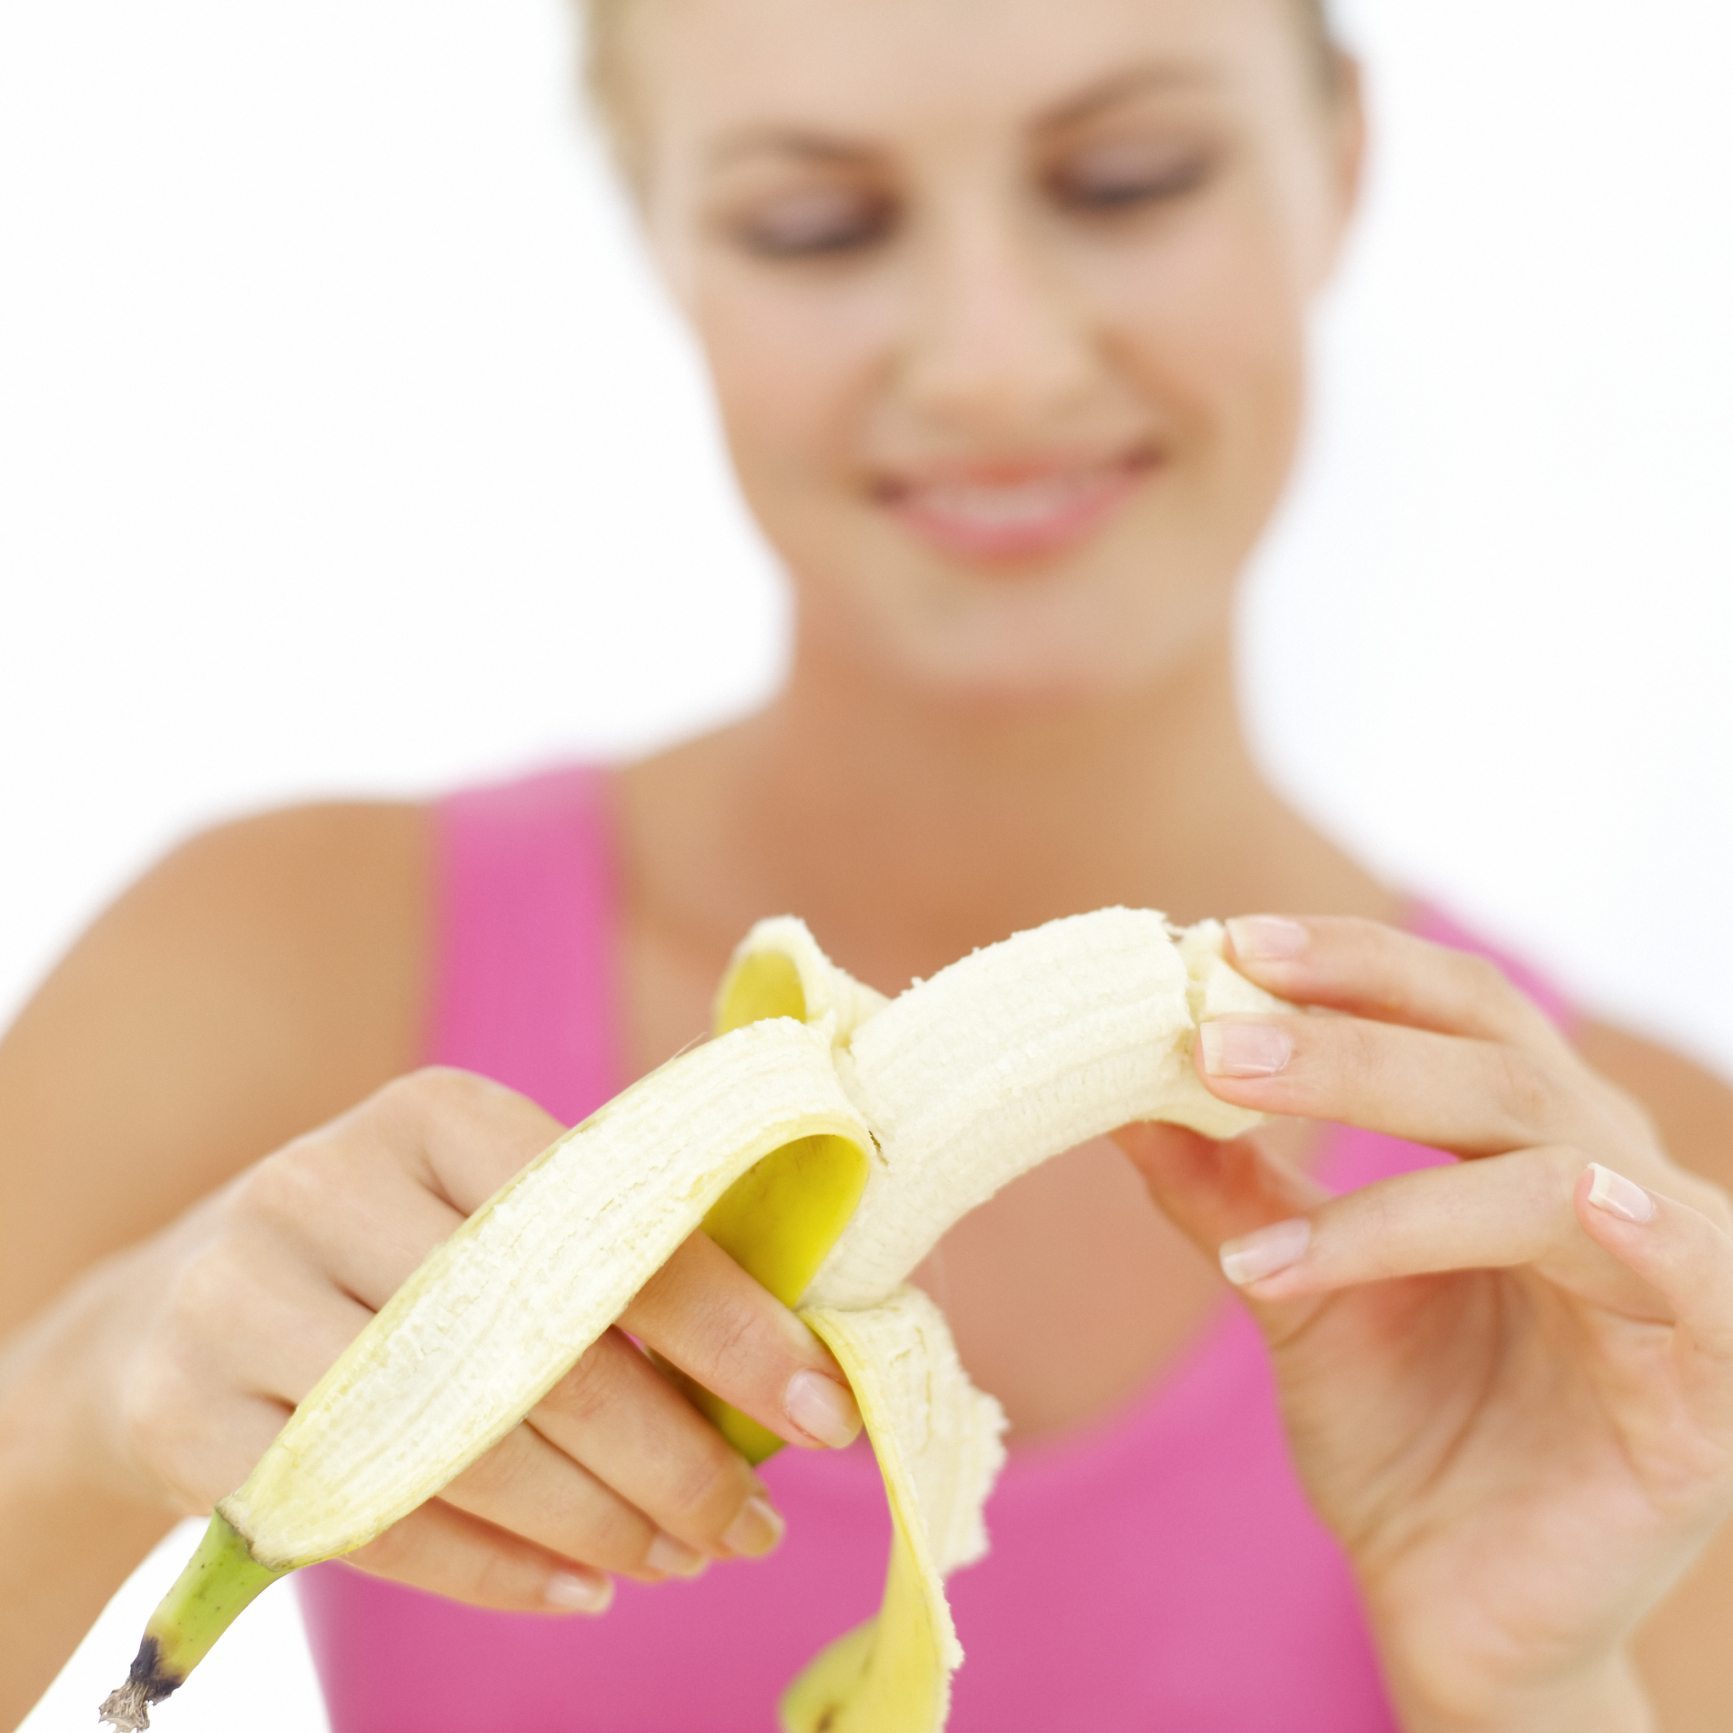 act or Fiction: Eat Bananas for A Mood Boost!